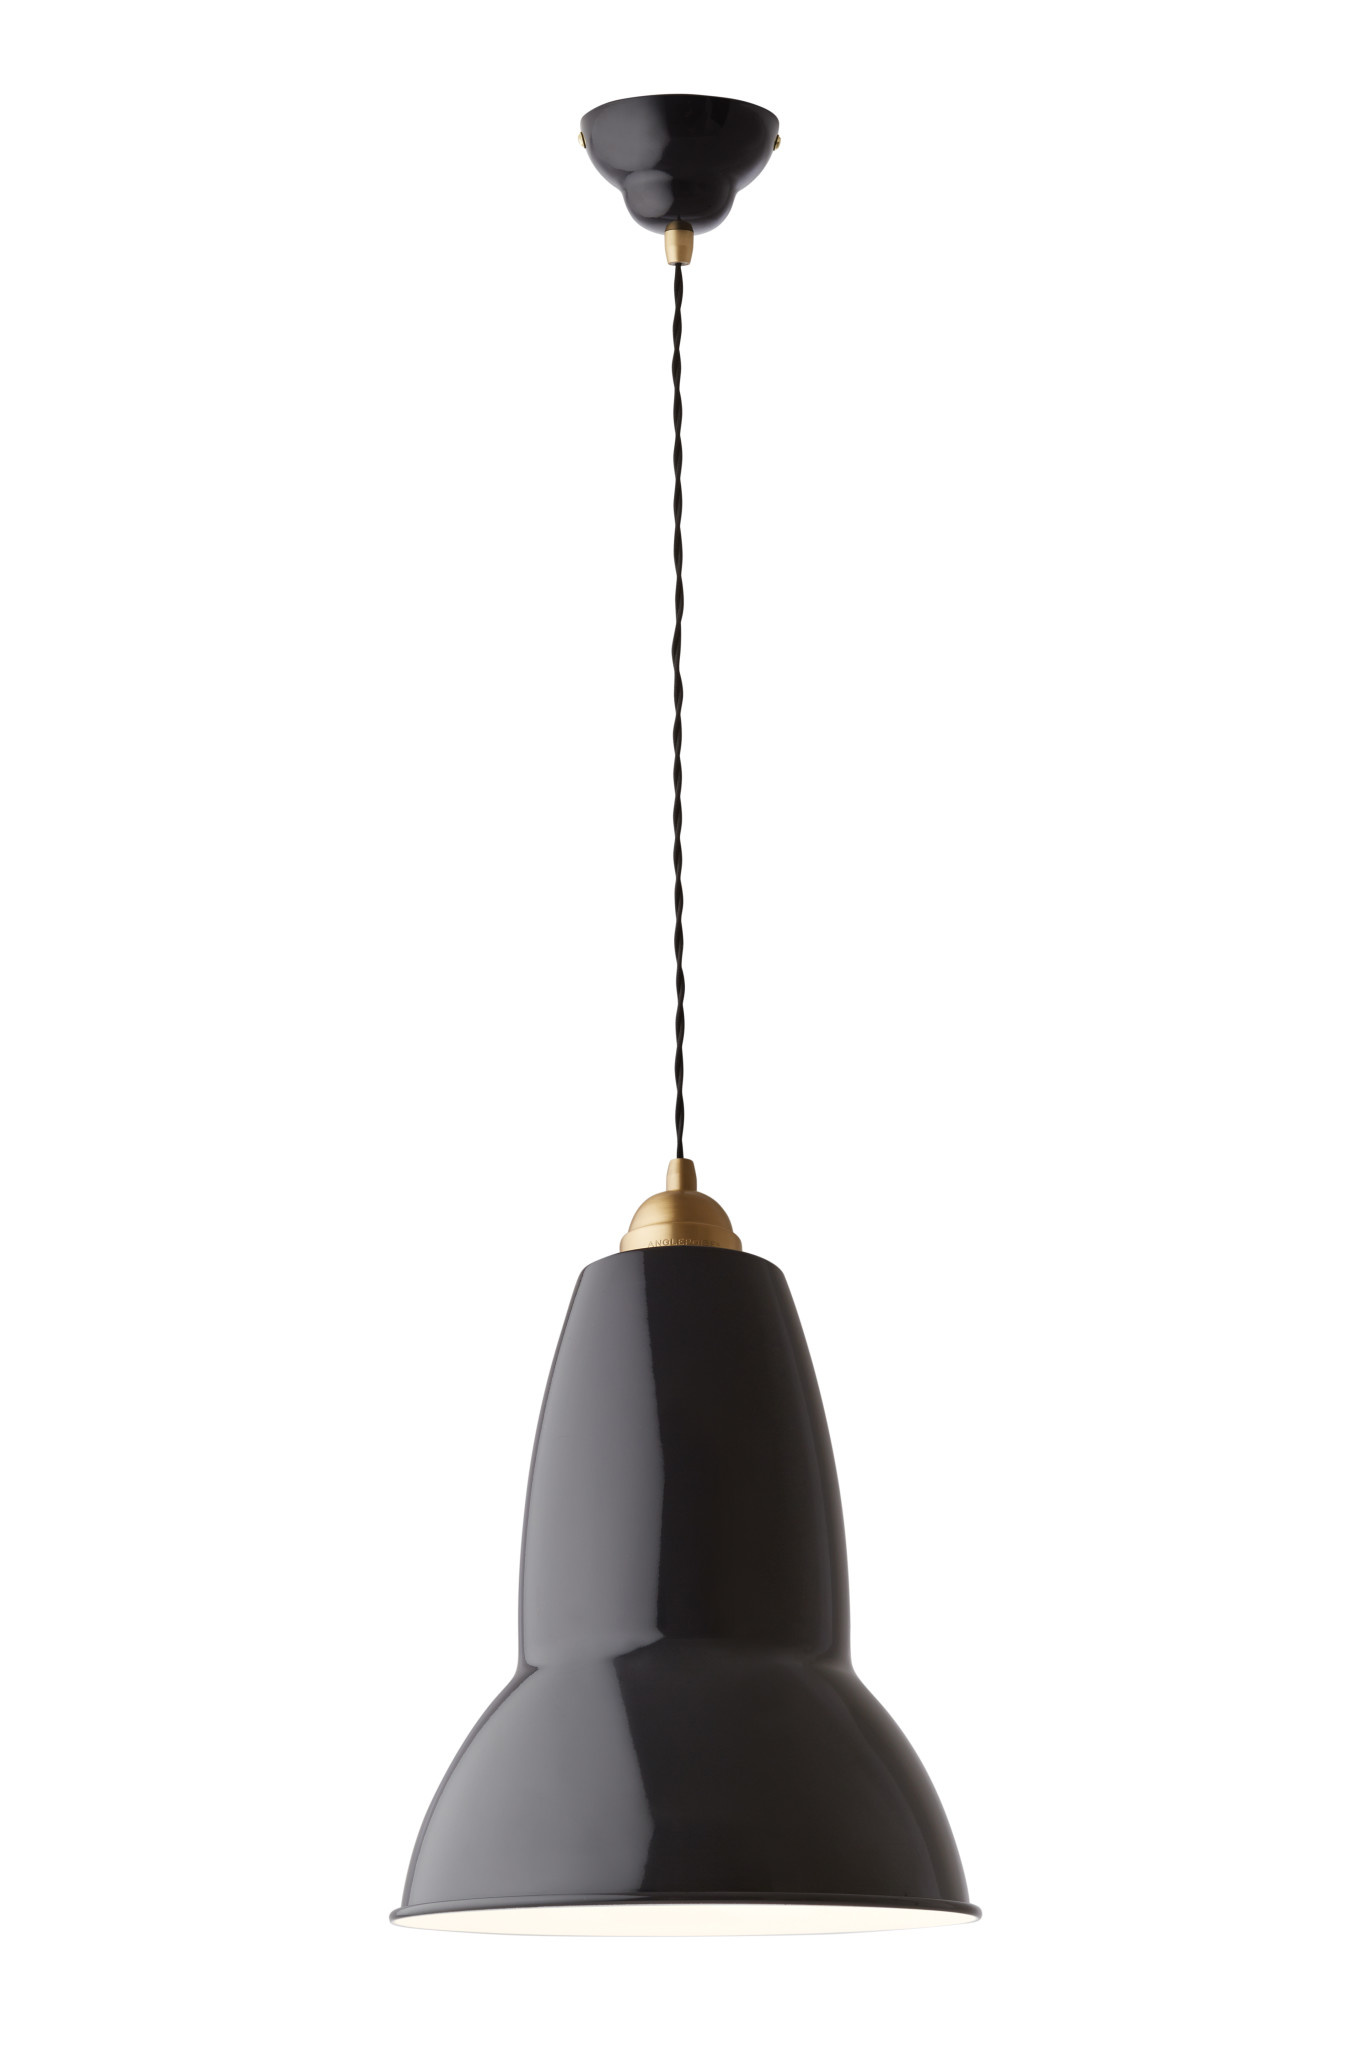 Anglepoise PREORDER Original 1227 Maxi Pendant Lamp - Jet Black with Brass